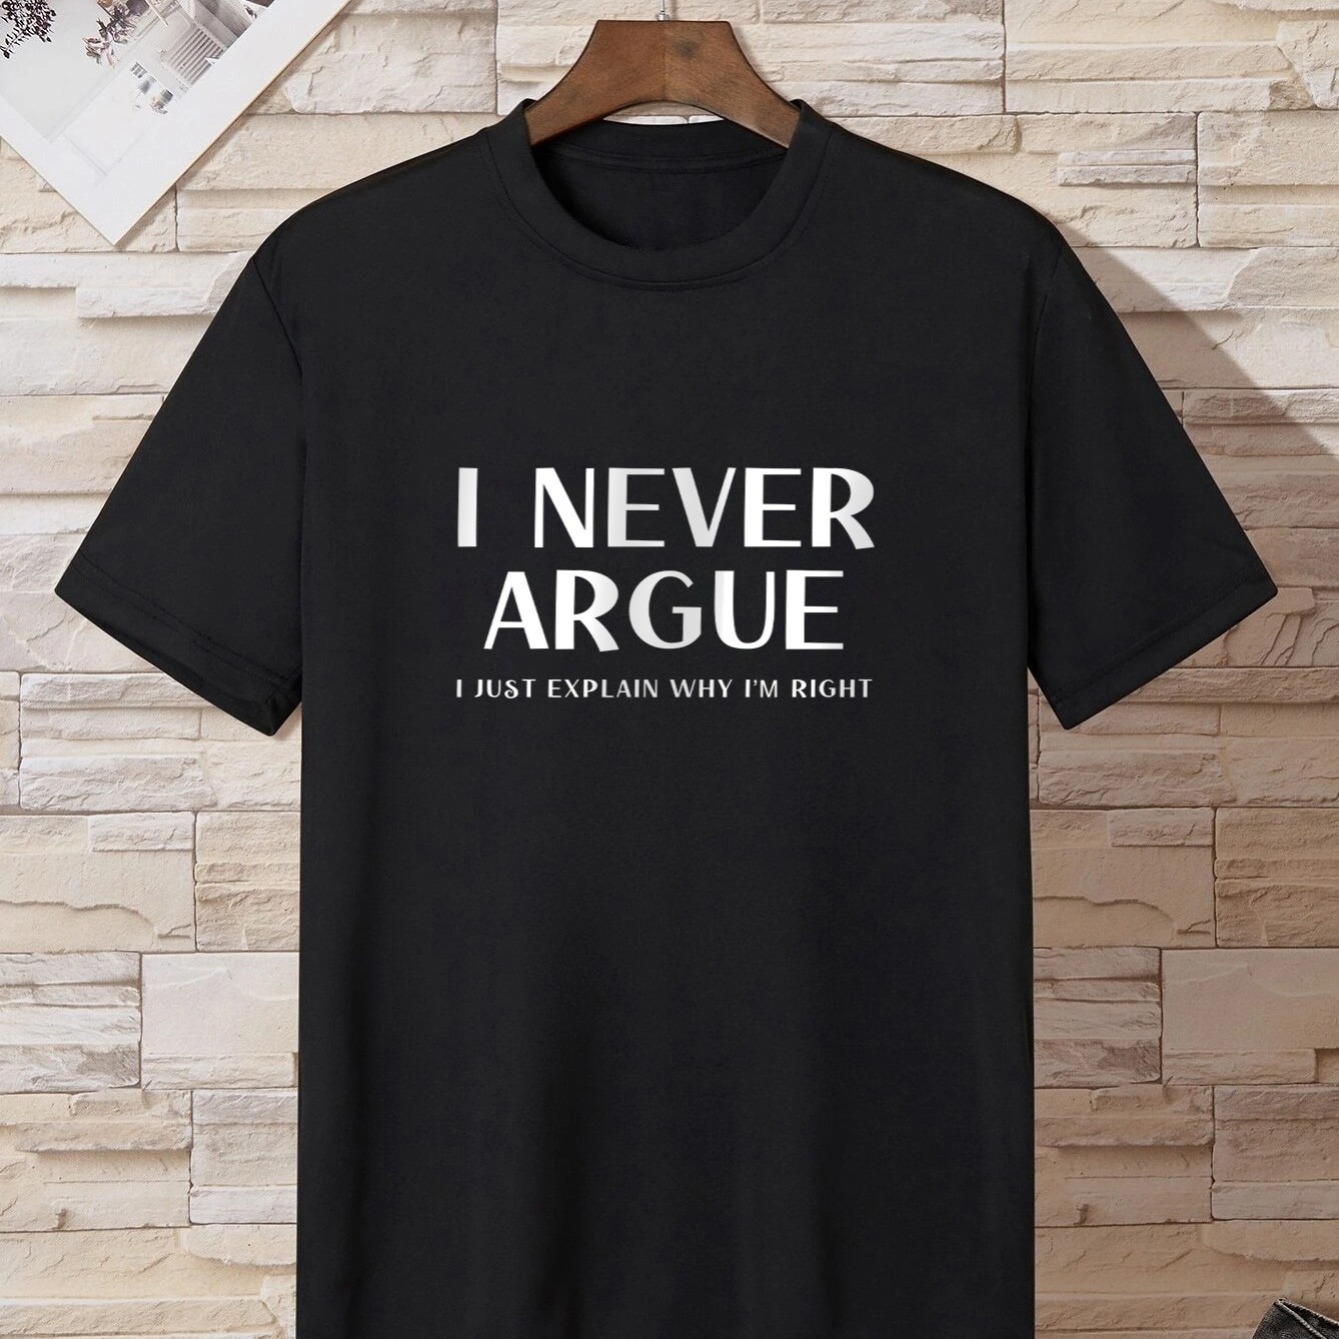 Men's Tee Casual Crew Neck Short Sleeve T Shirts With I Never Argue ...